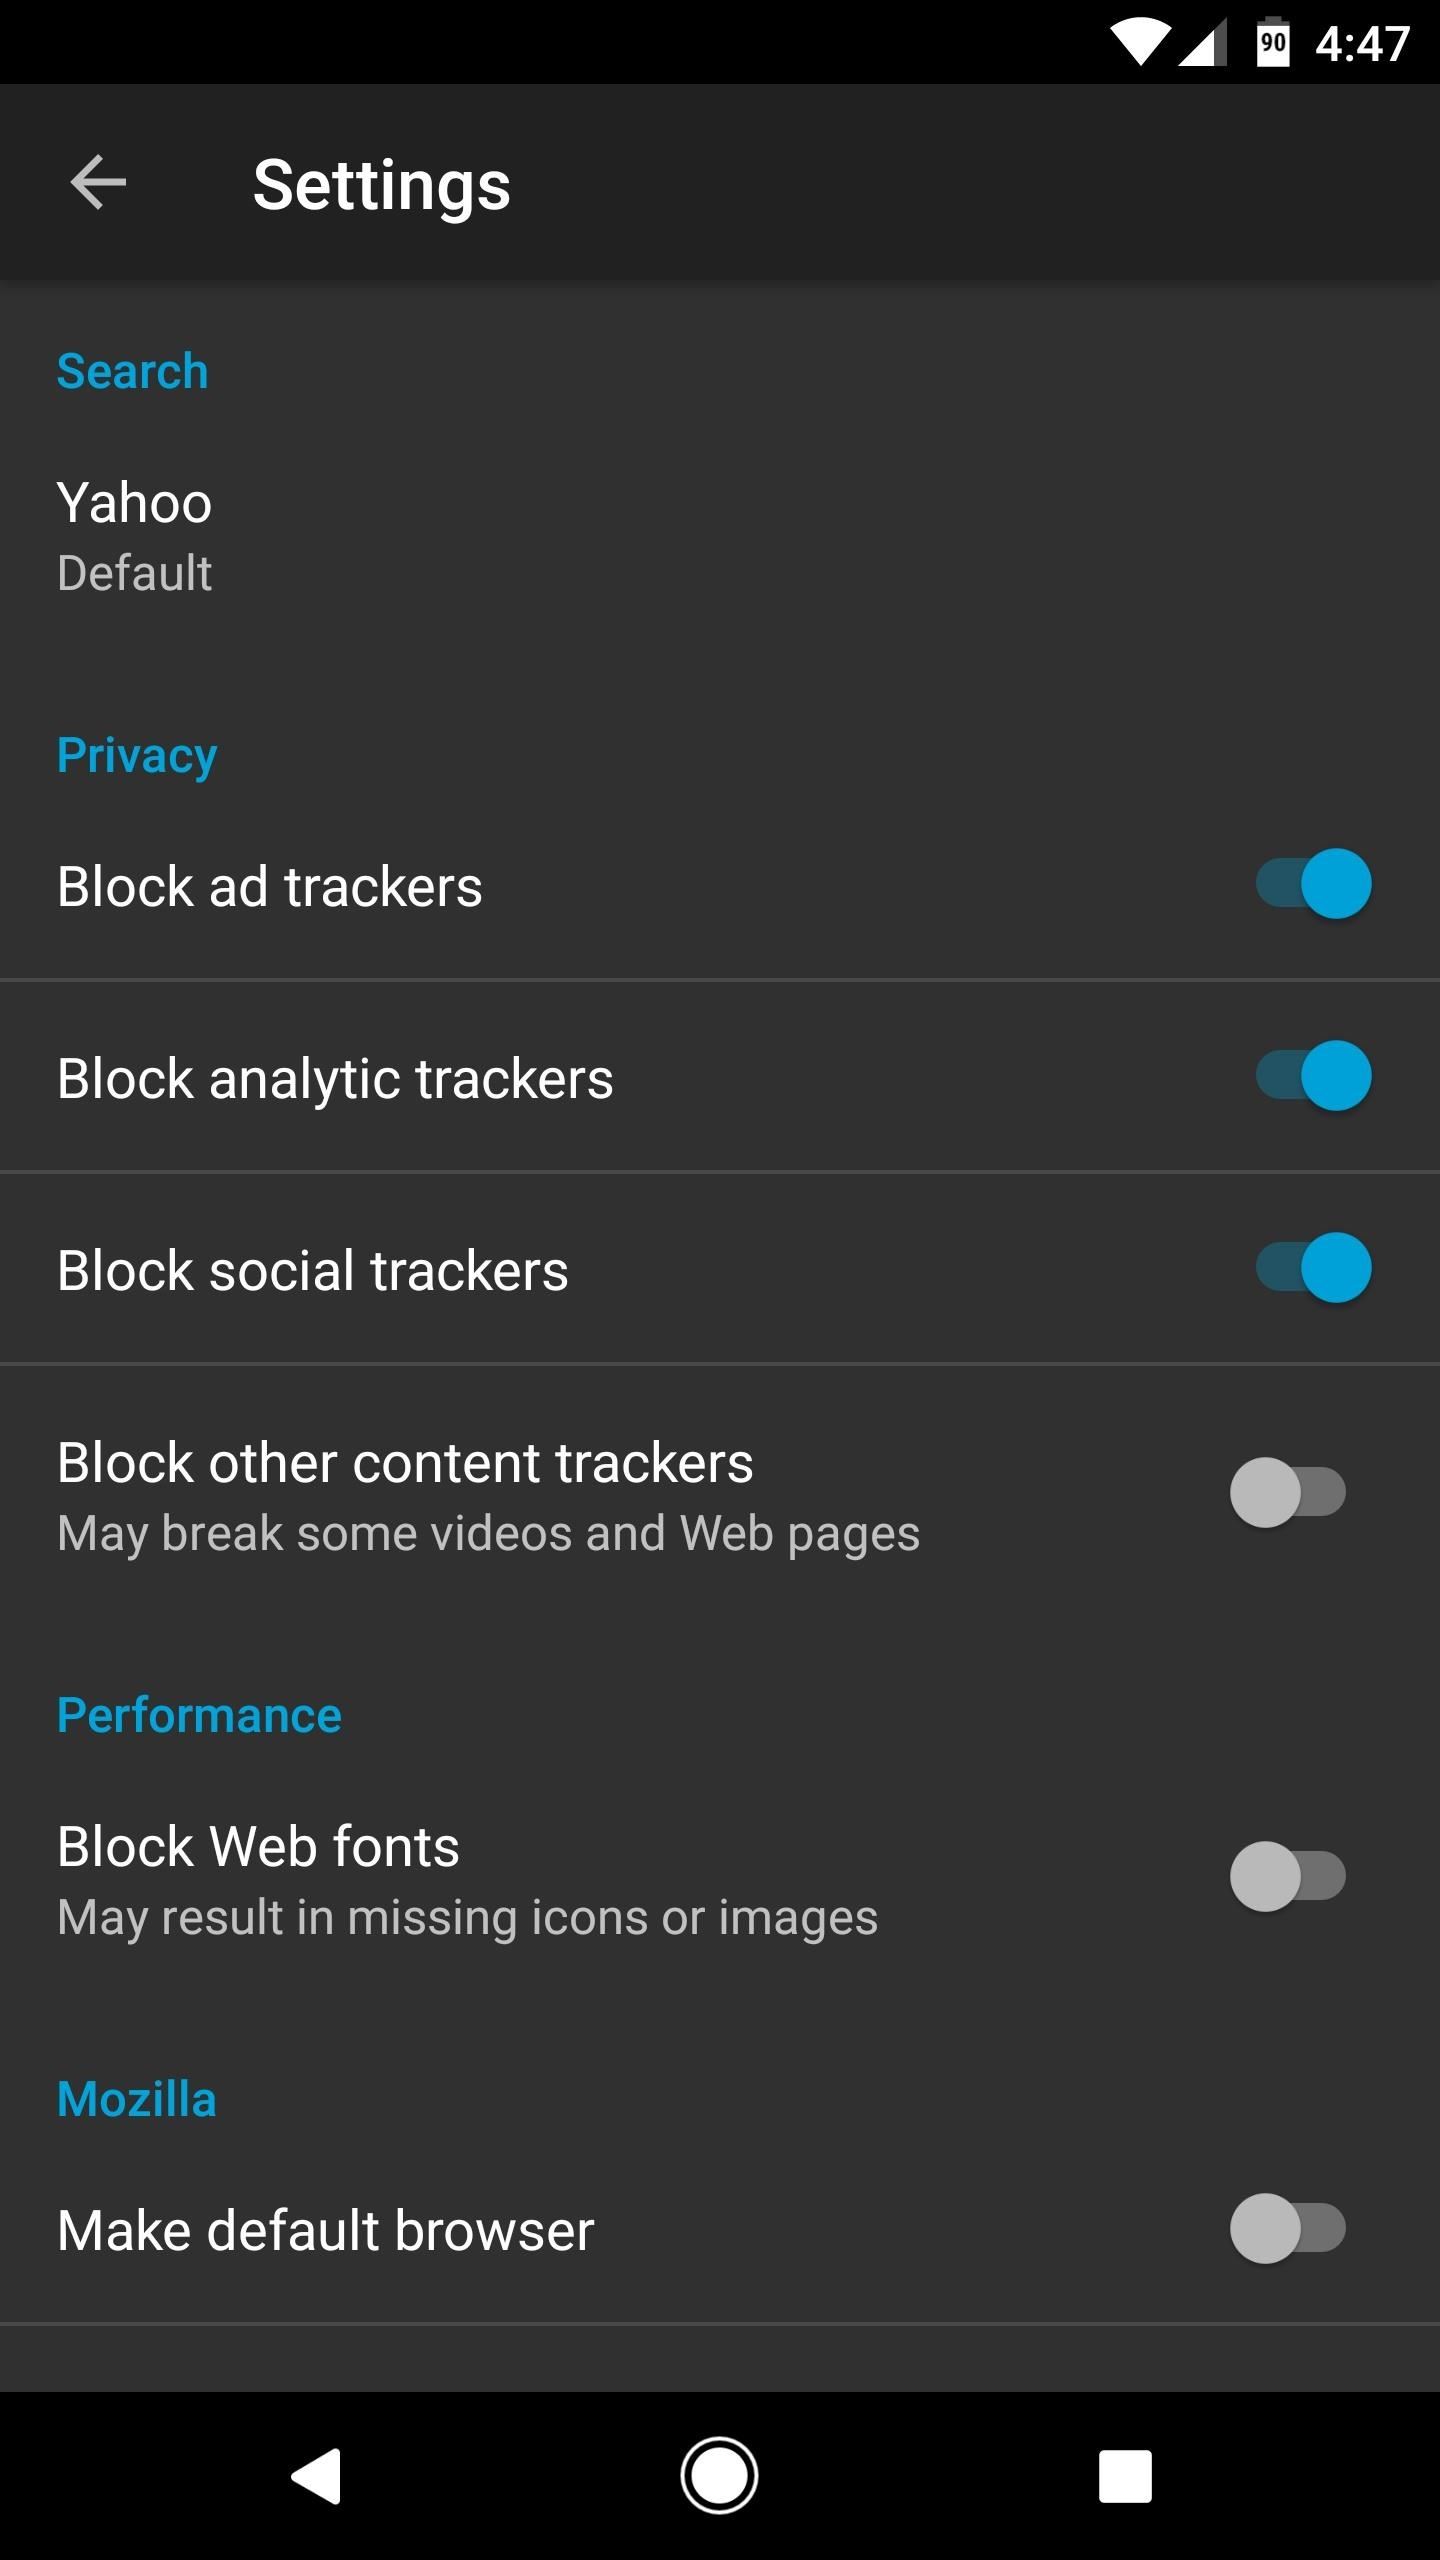 How to Try Mozilla's Privacy-Friendly Firefox Focus Browser on Android Right Now